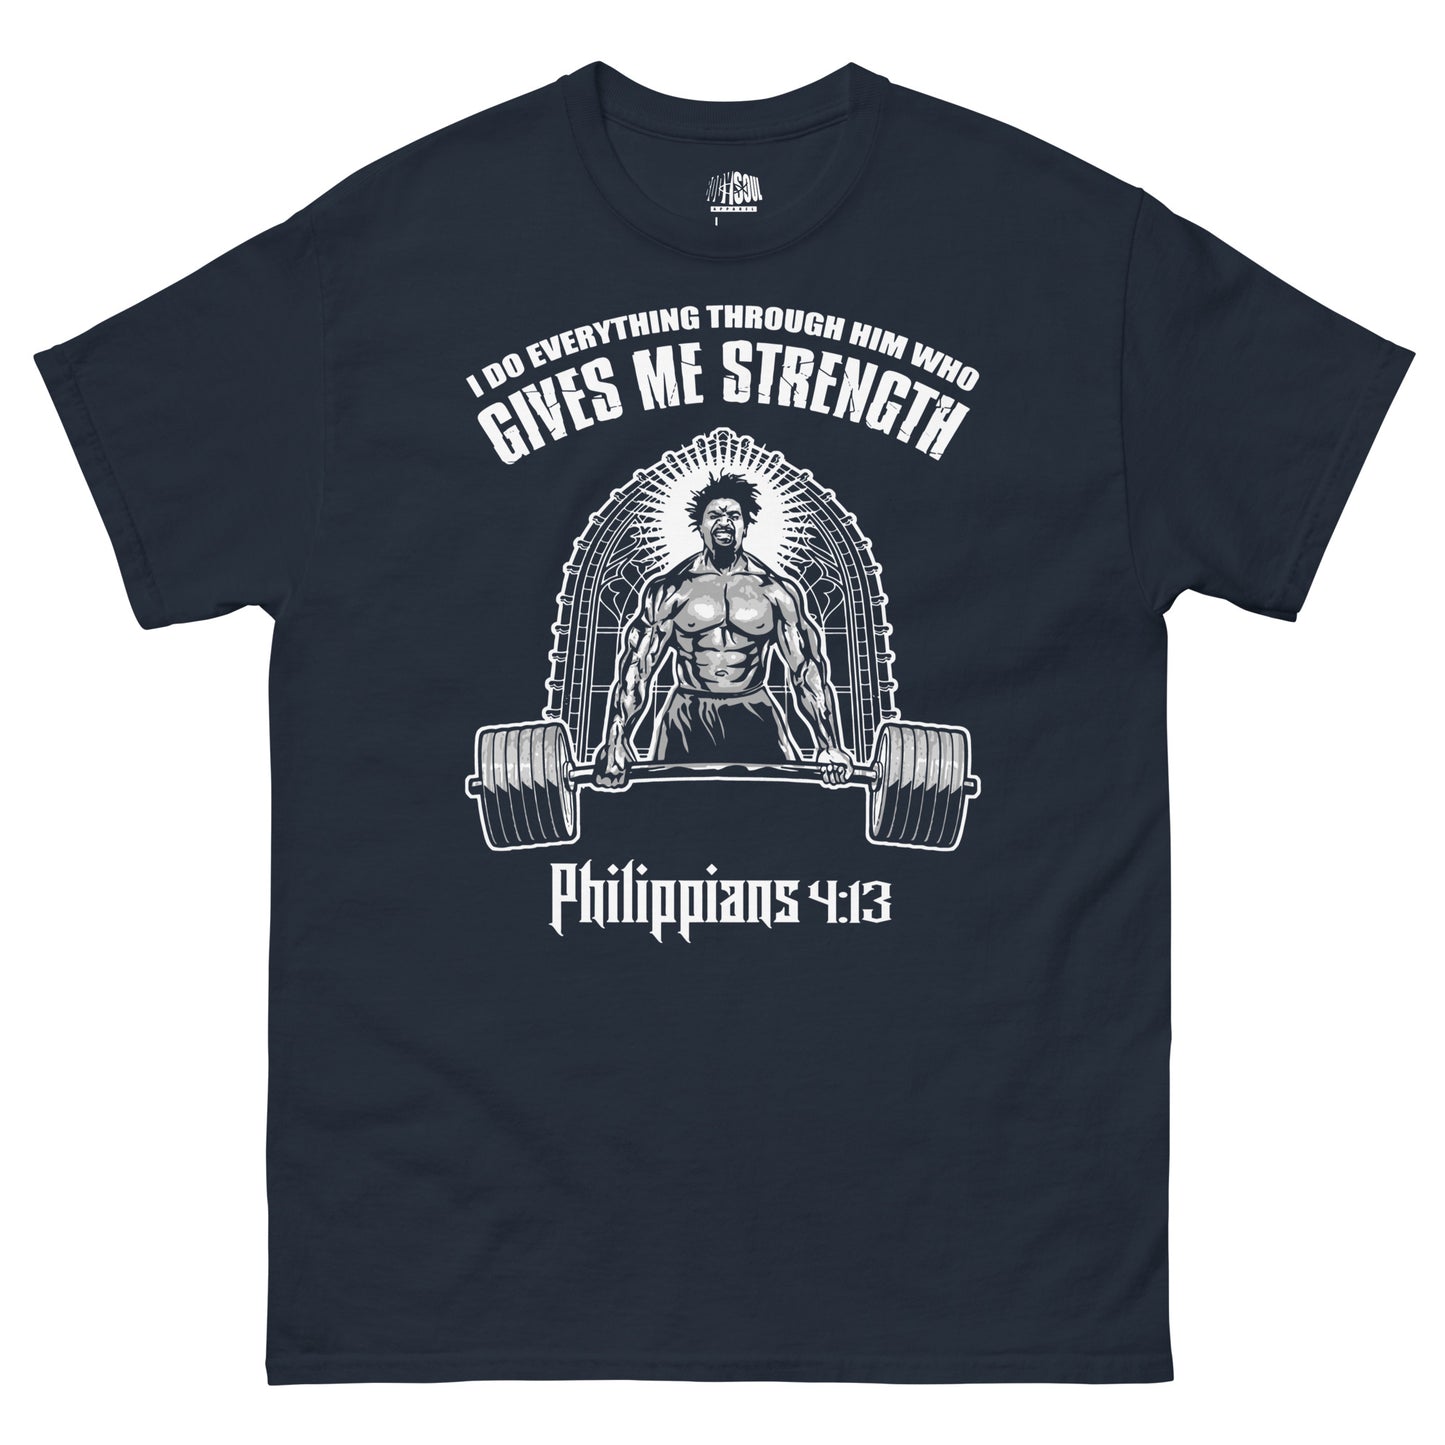 GIVES ME STRENGTH- Men's classic tee